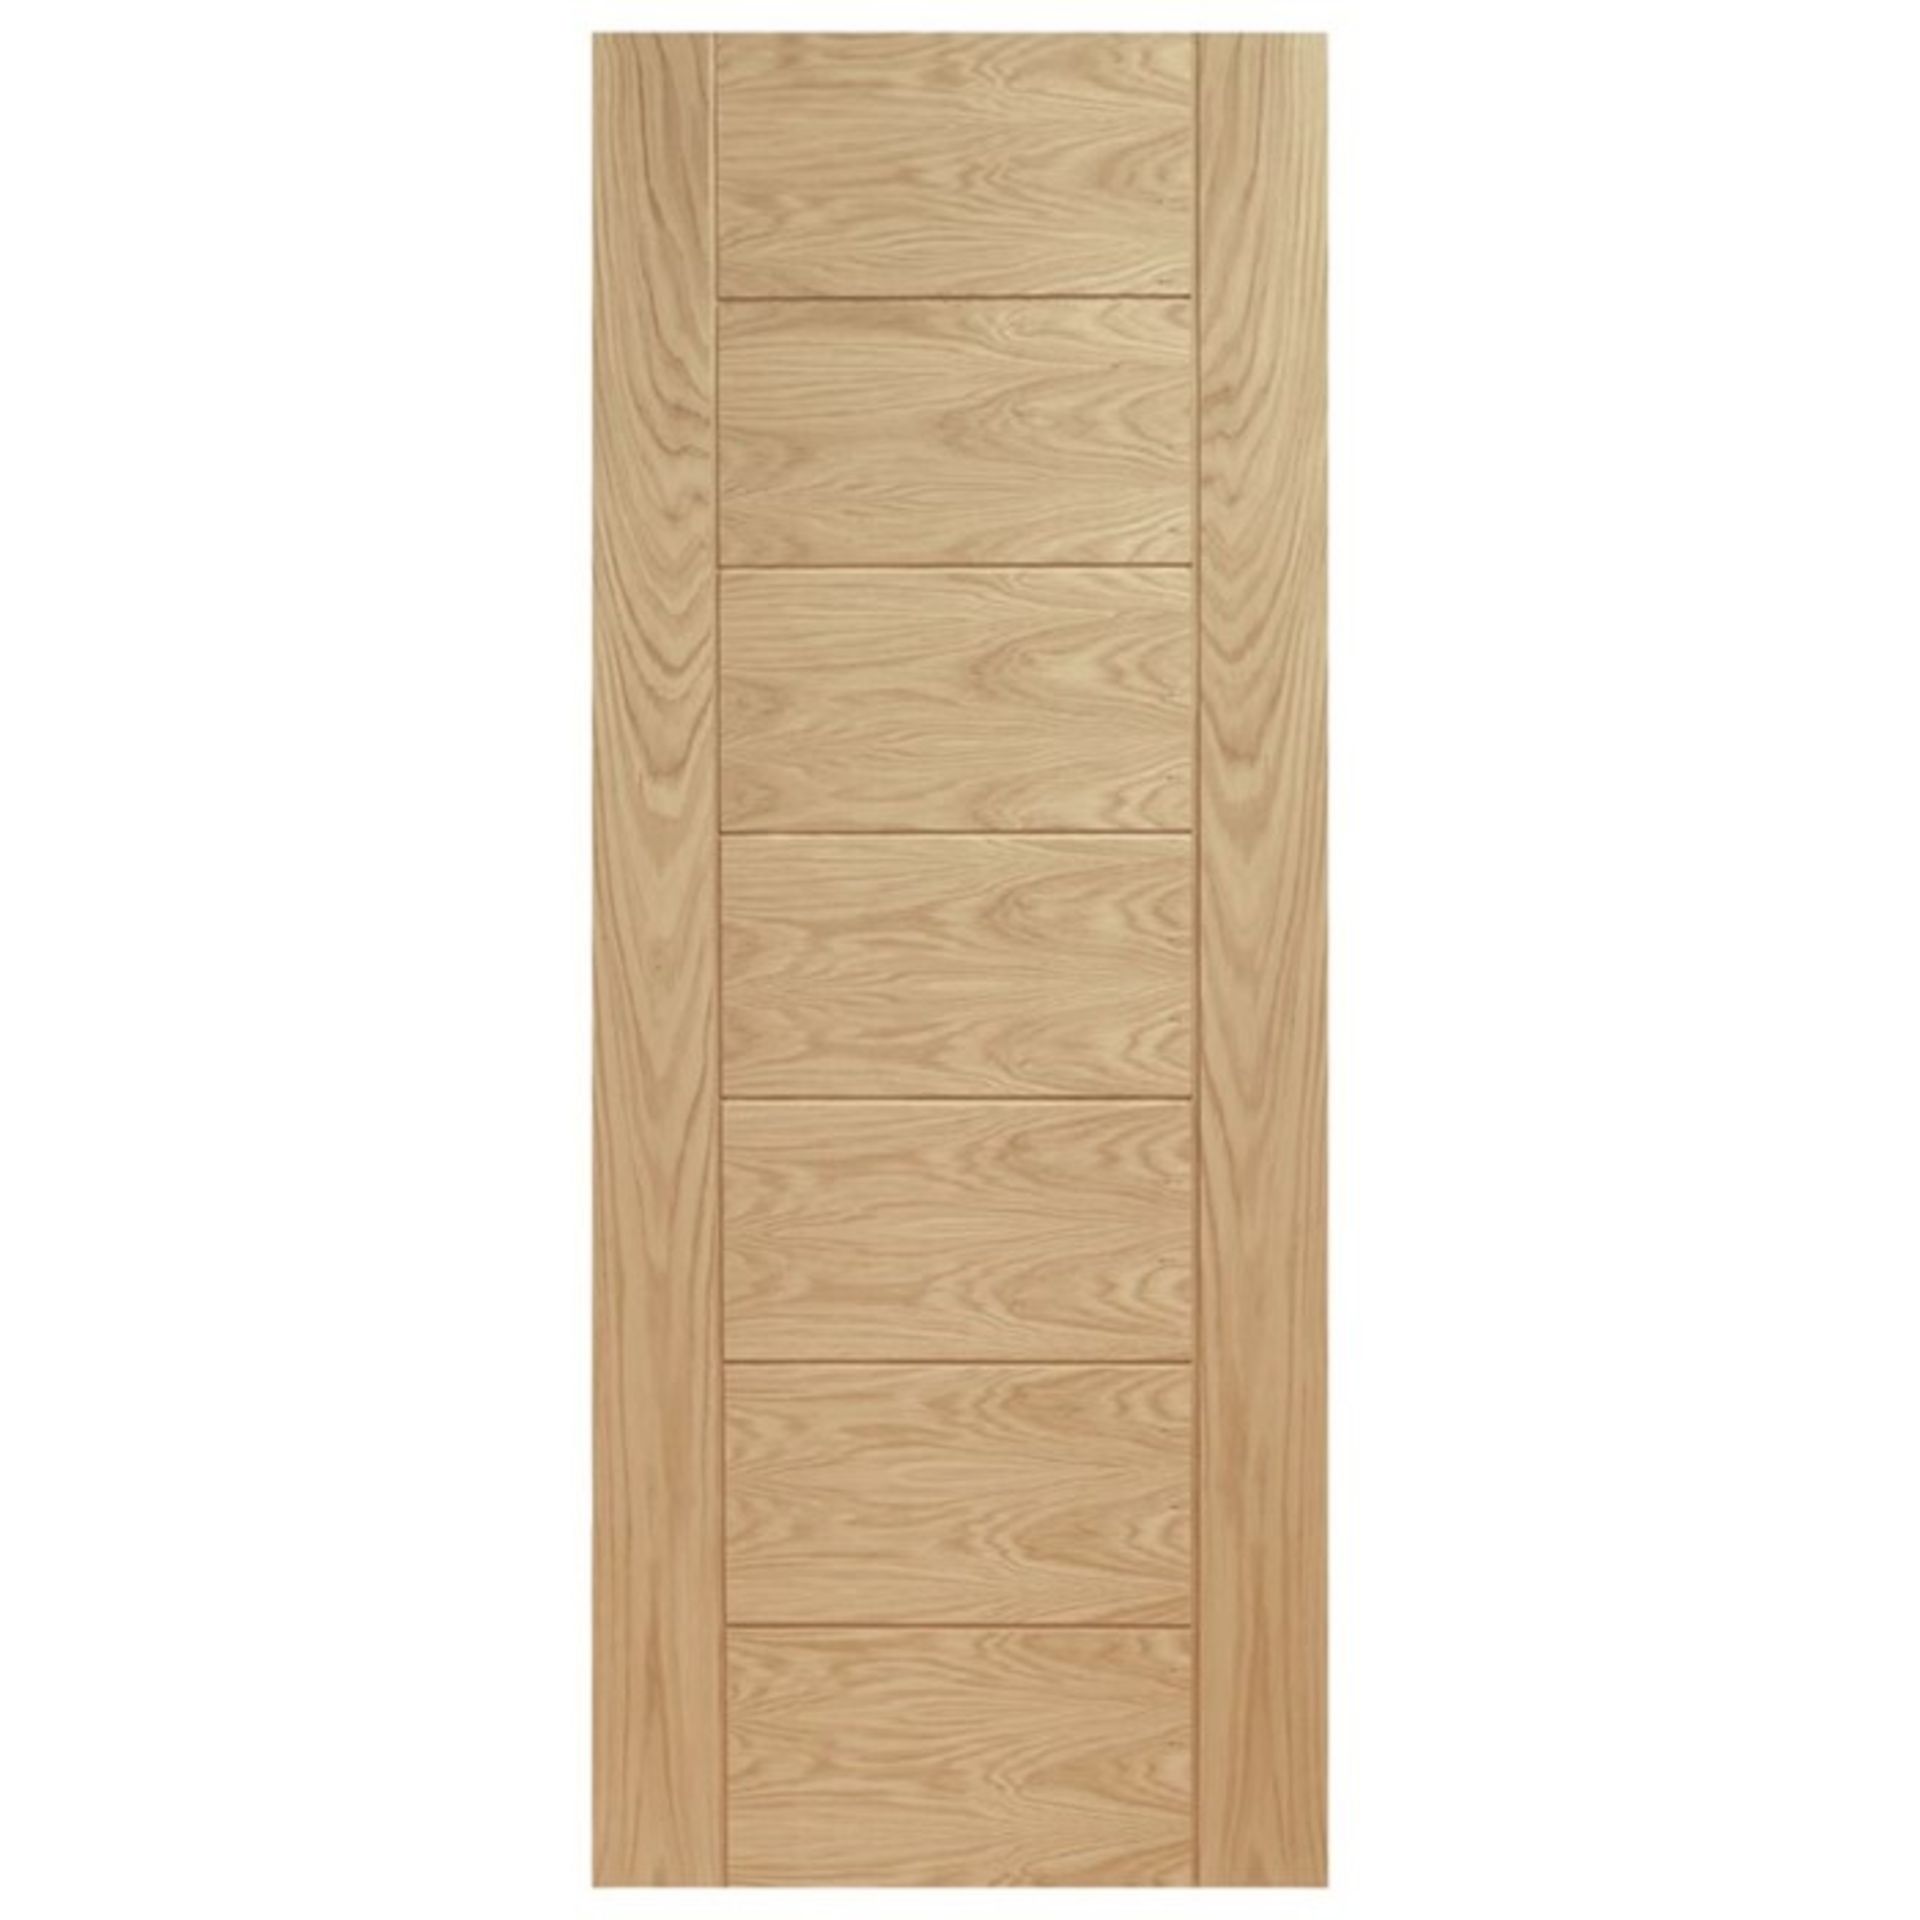 XL Joinery,Palermo Internal Door Unfinished RRP -£126.99(20574/10 -SDJD1615)